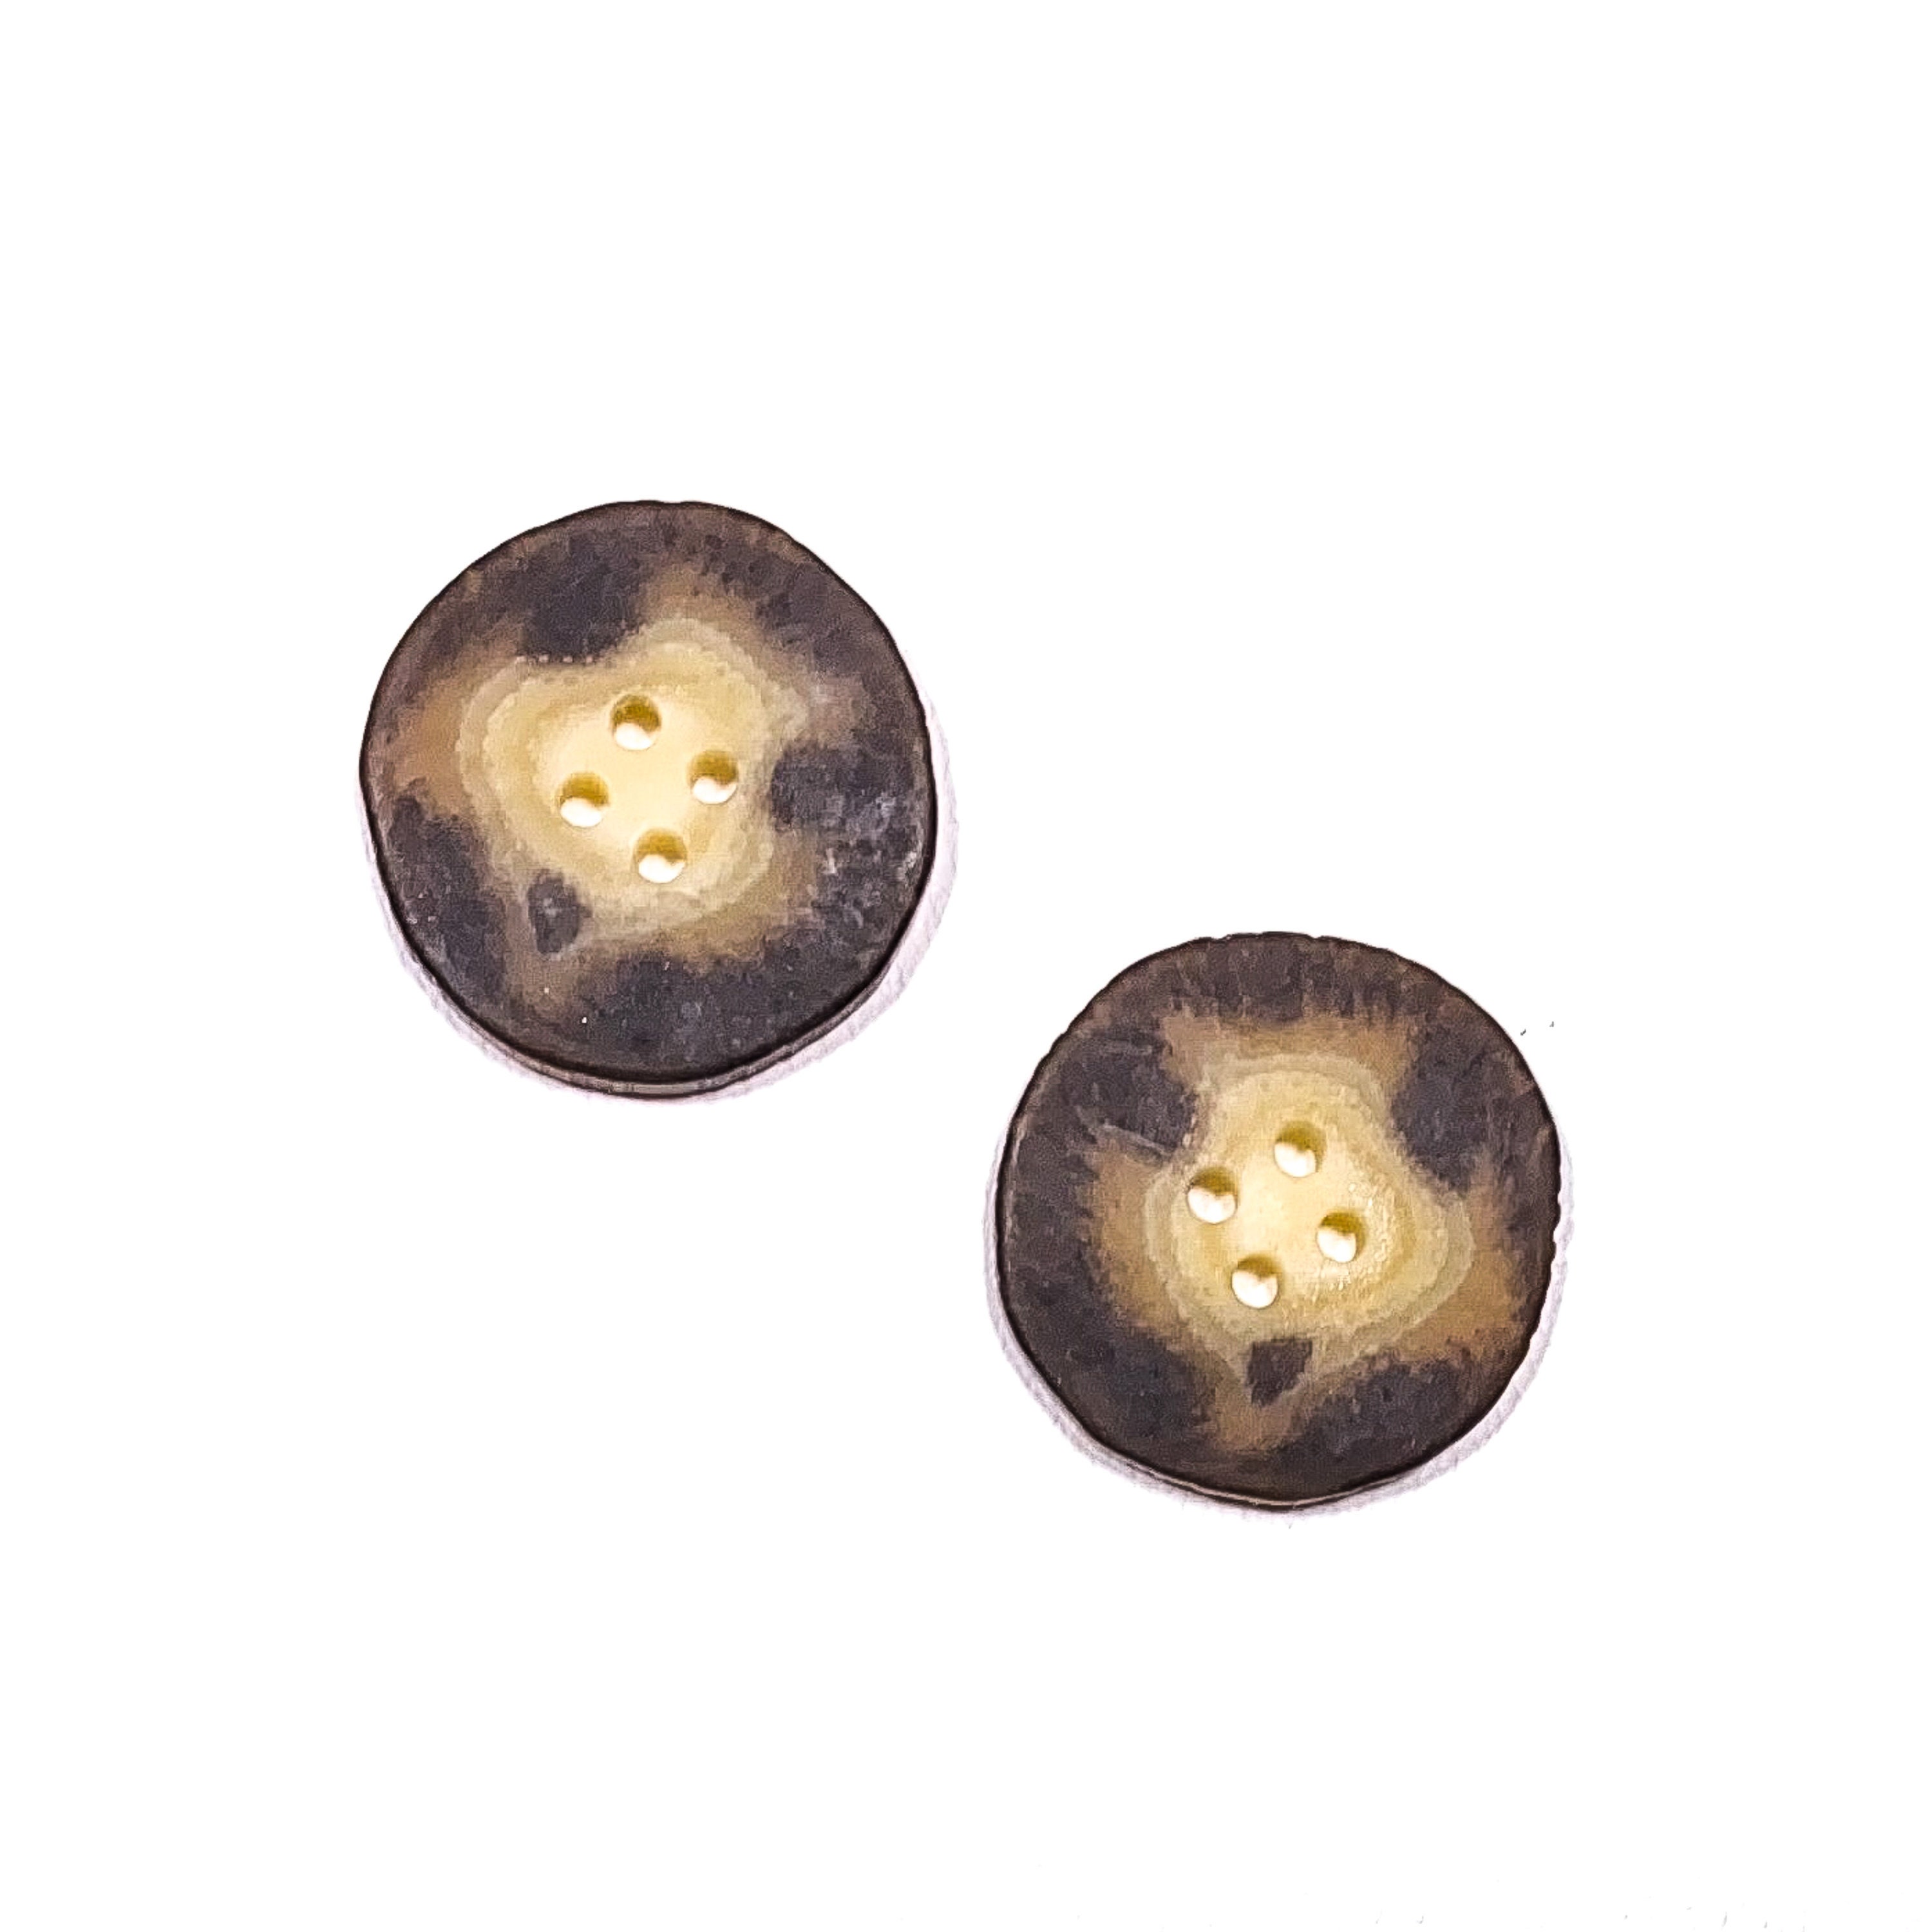 DT36 - Horn sewing buttons for suspenders - COMPANION DENIM